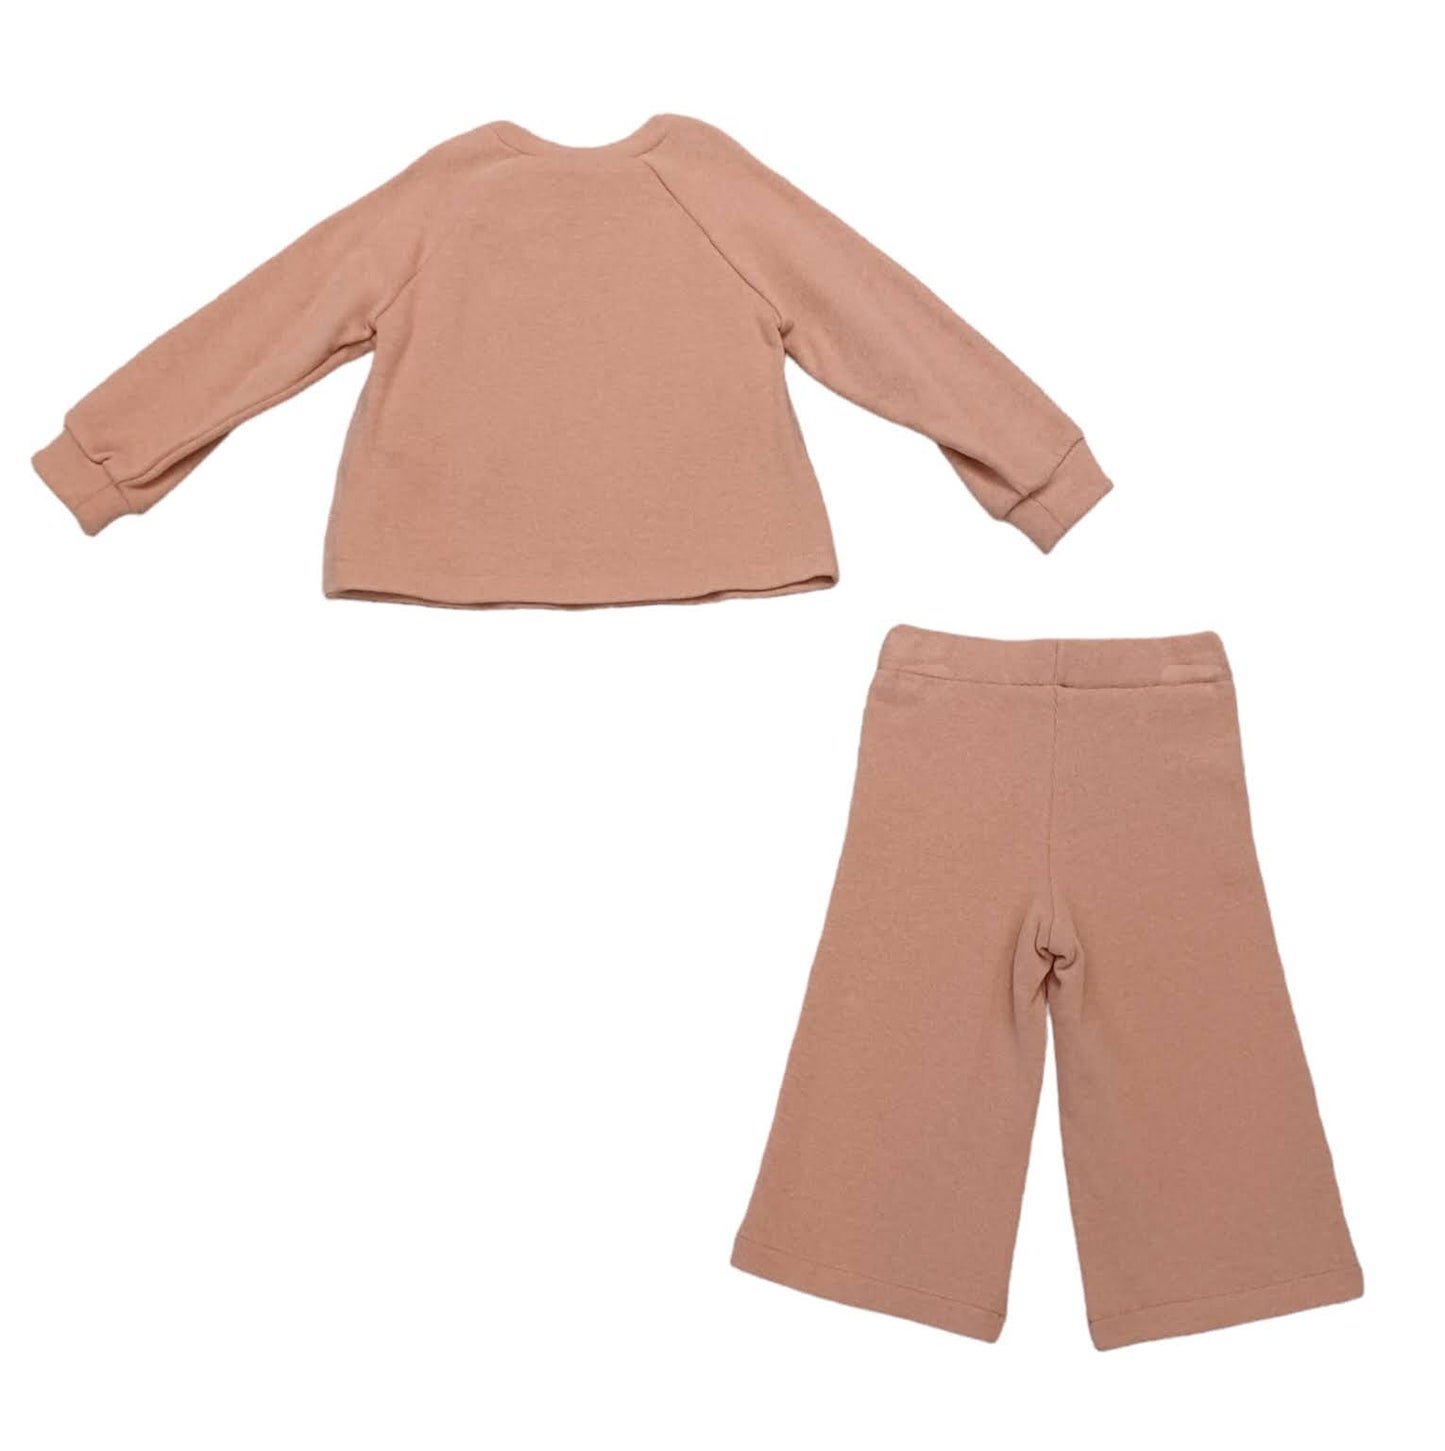 ELSY Girl 2-piece pink top + trousers set